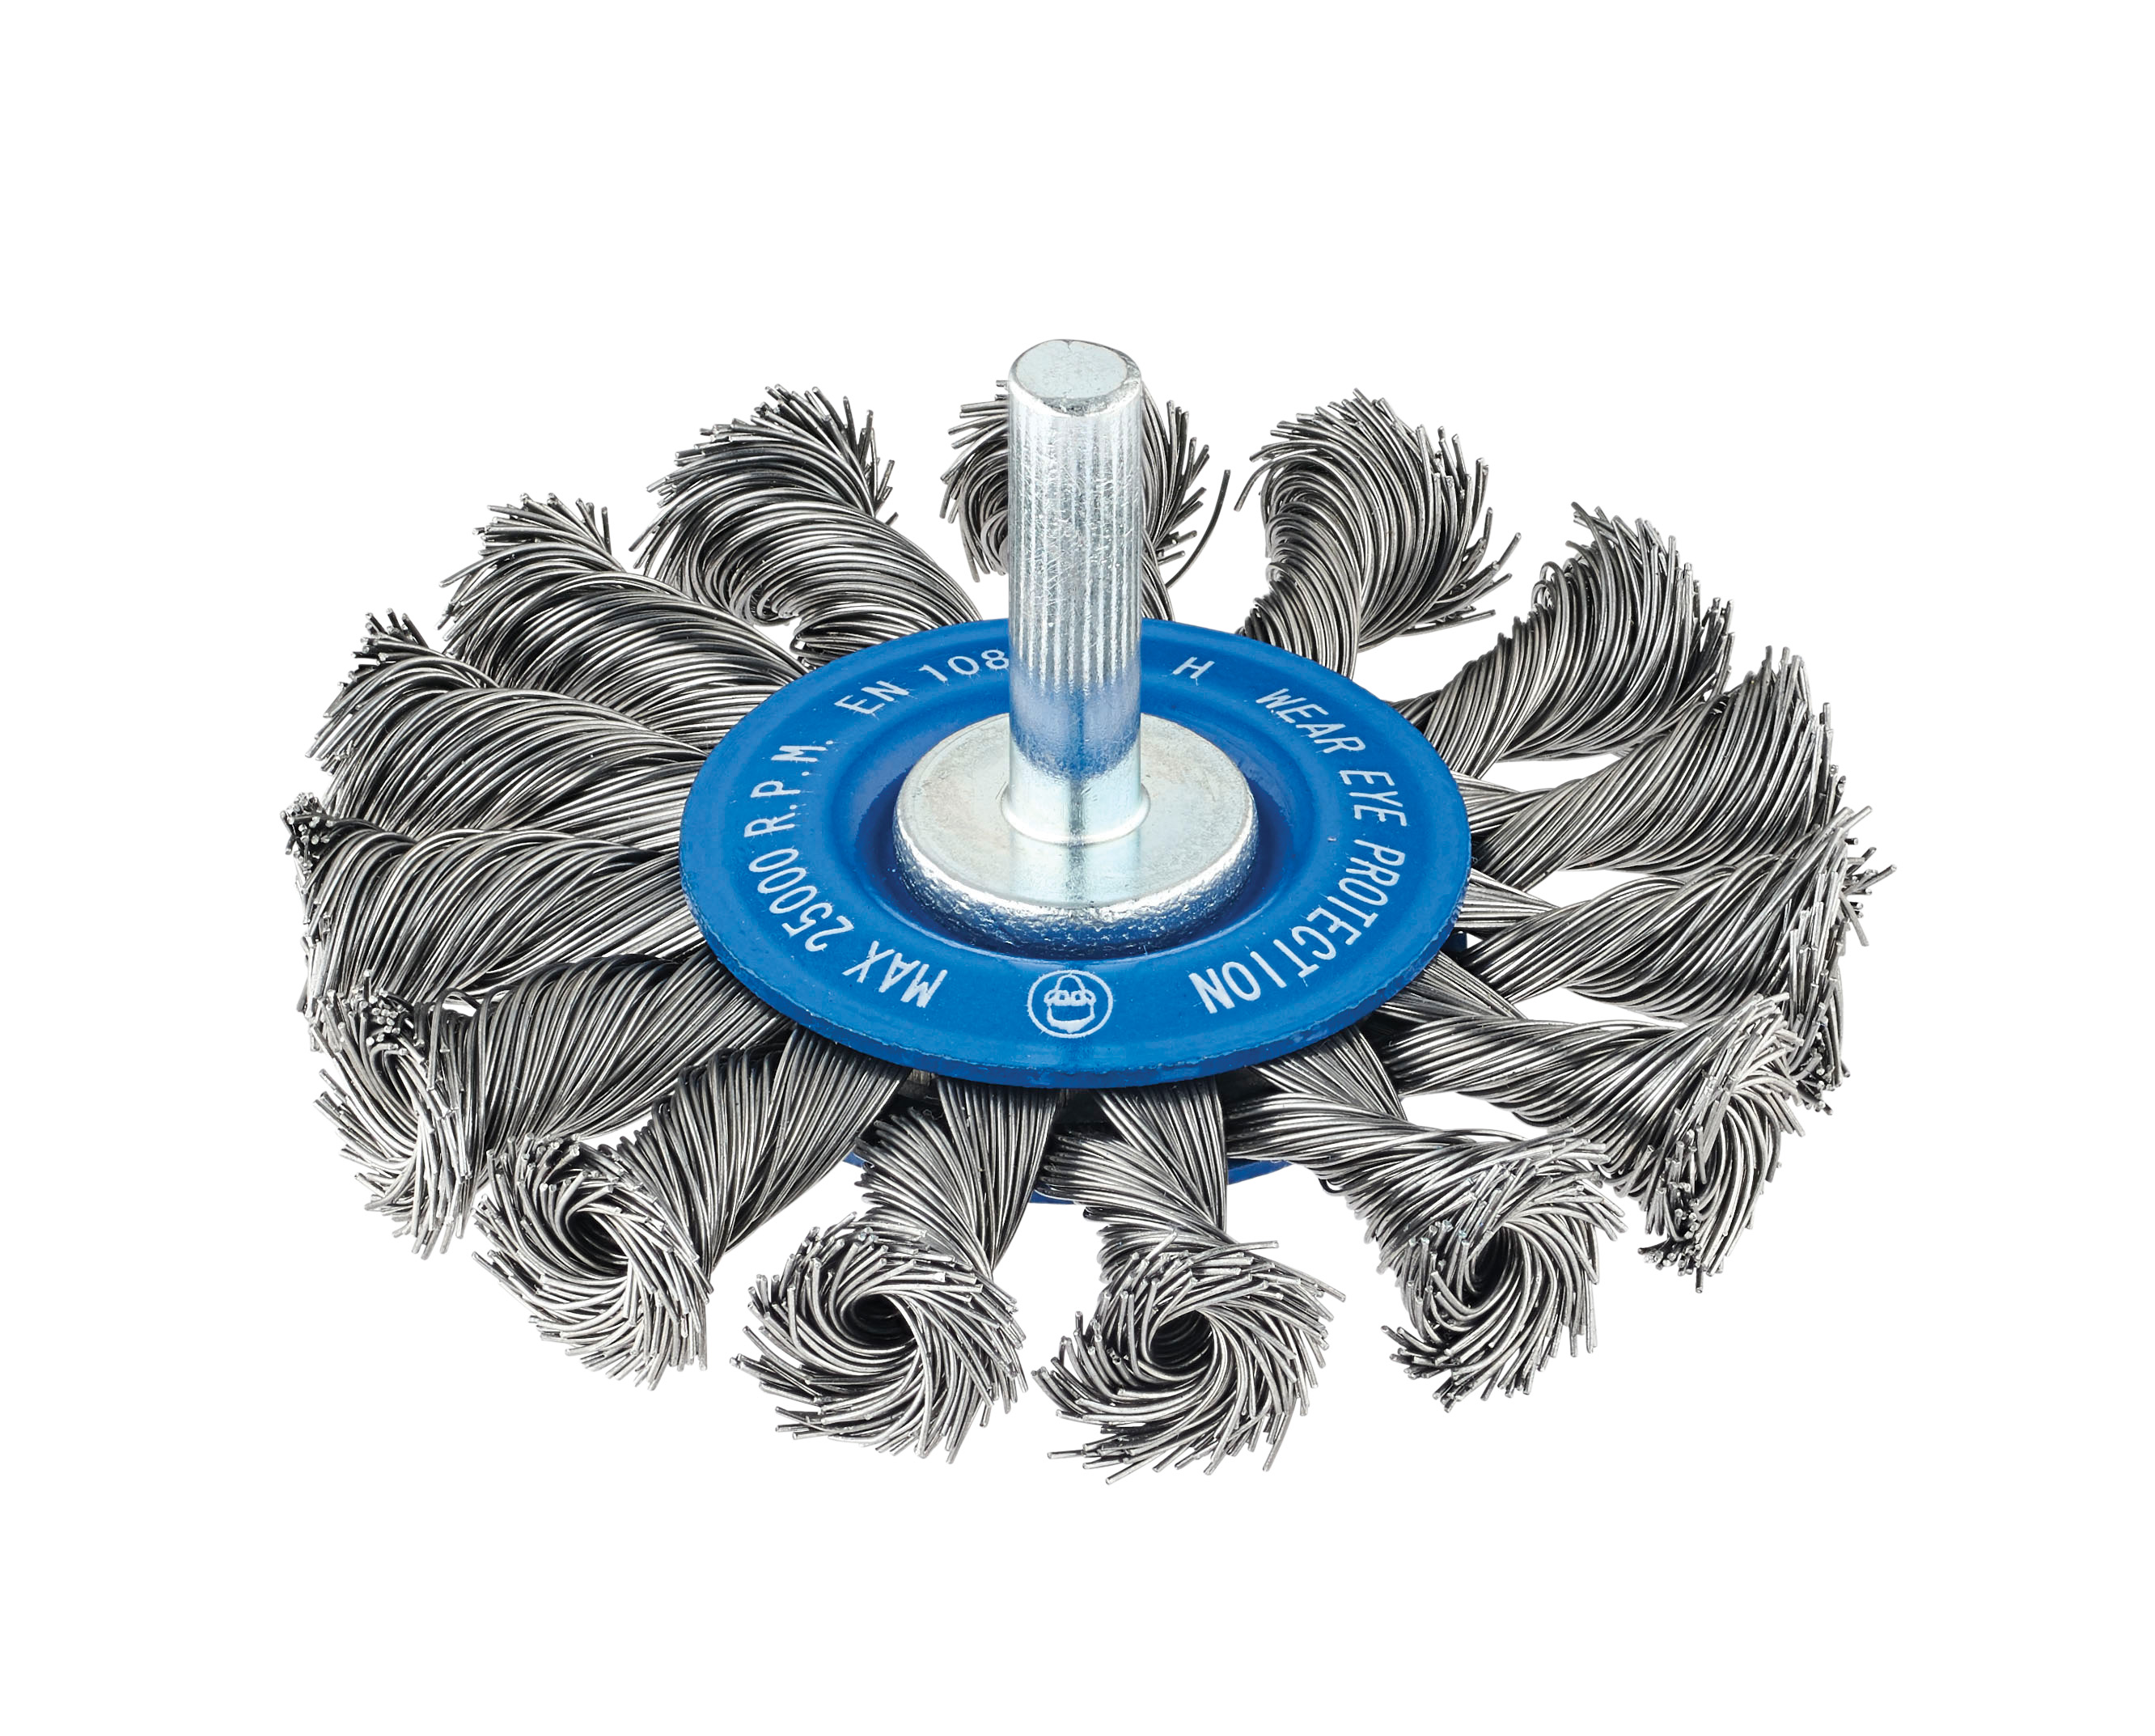 Image of Twisted Knot Stem Mount Wire Wheel Brushes – Carbon Steel 